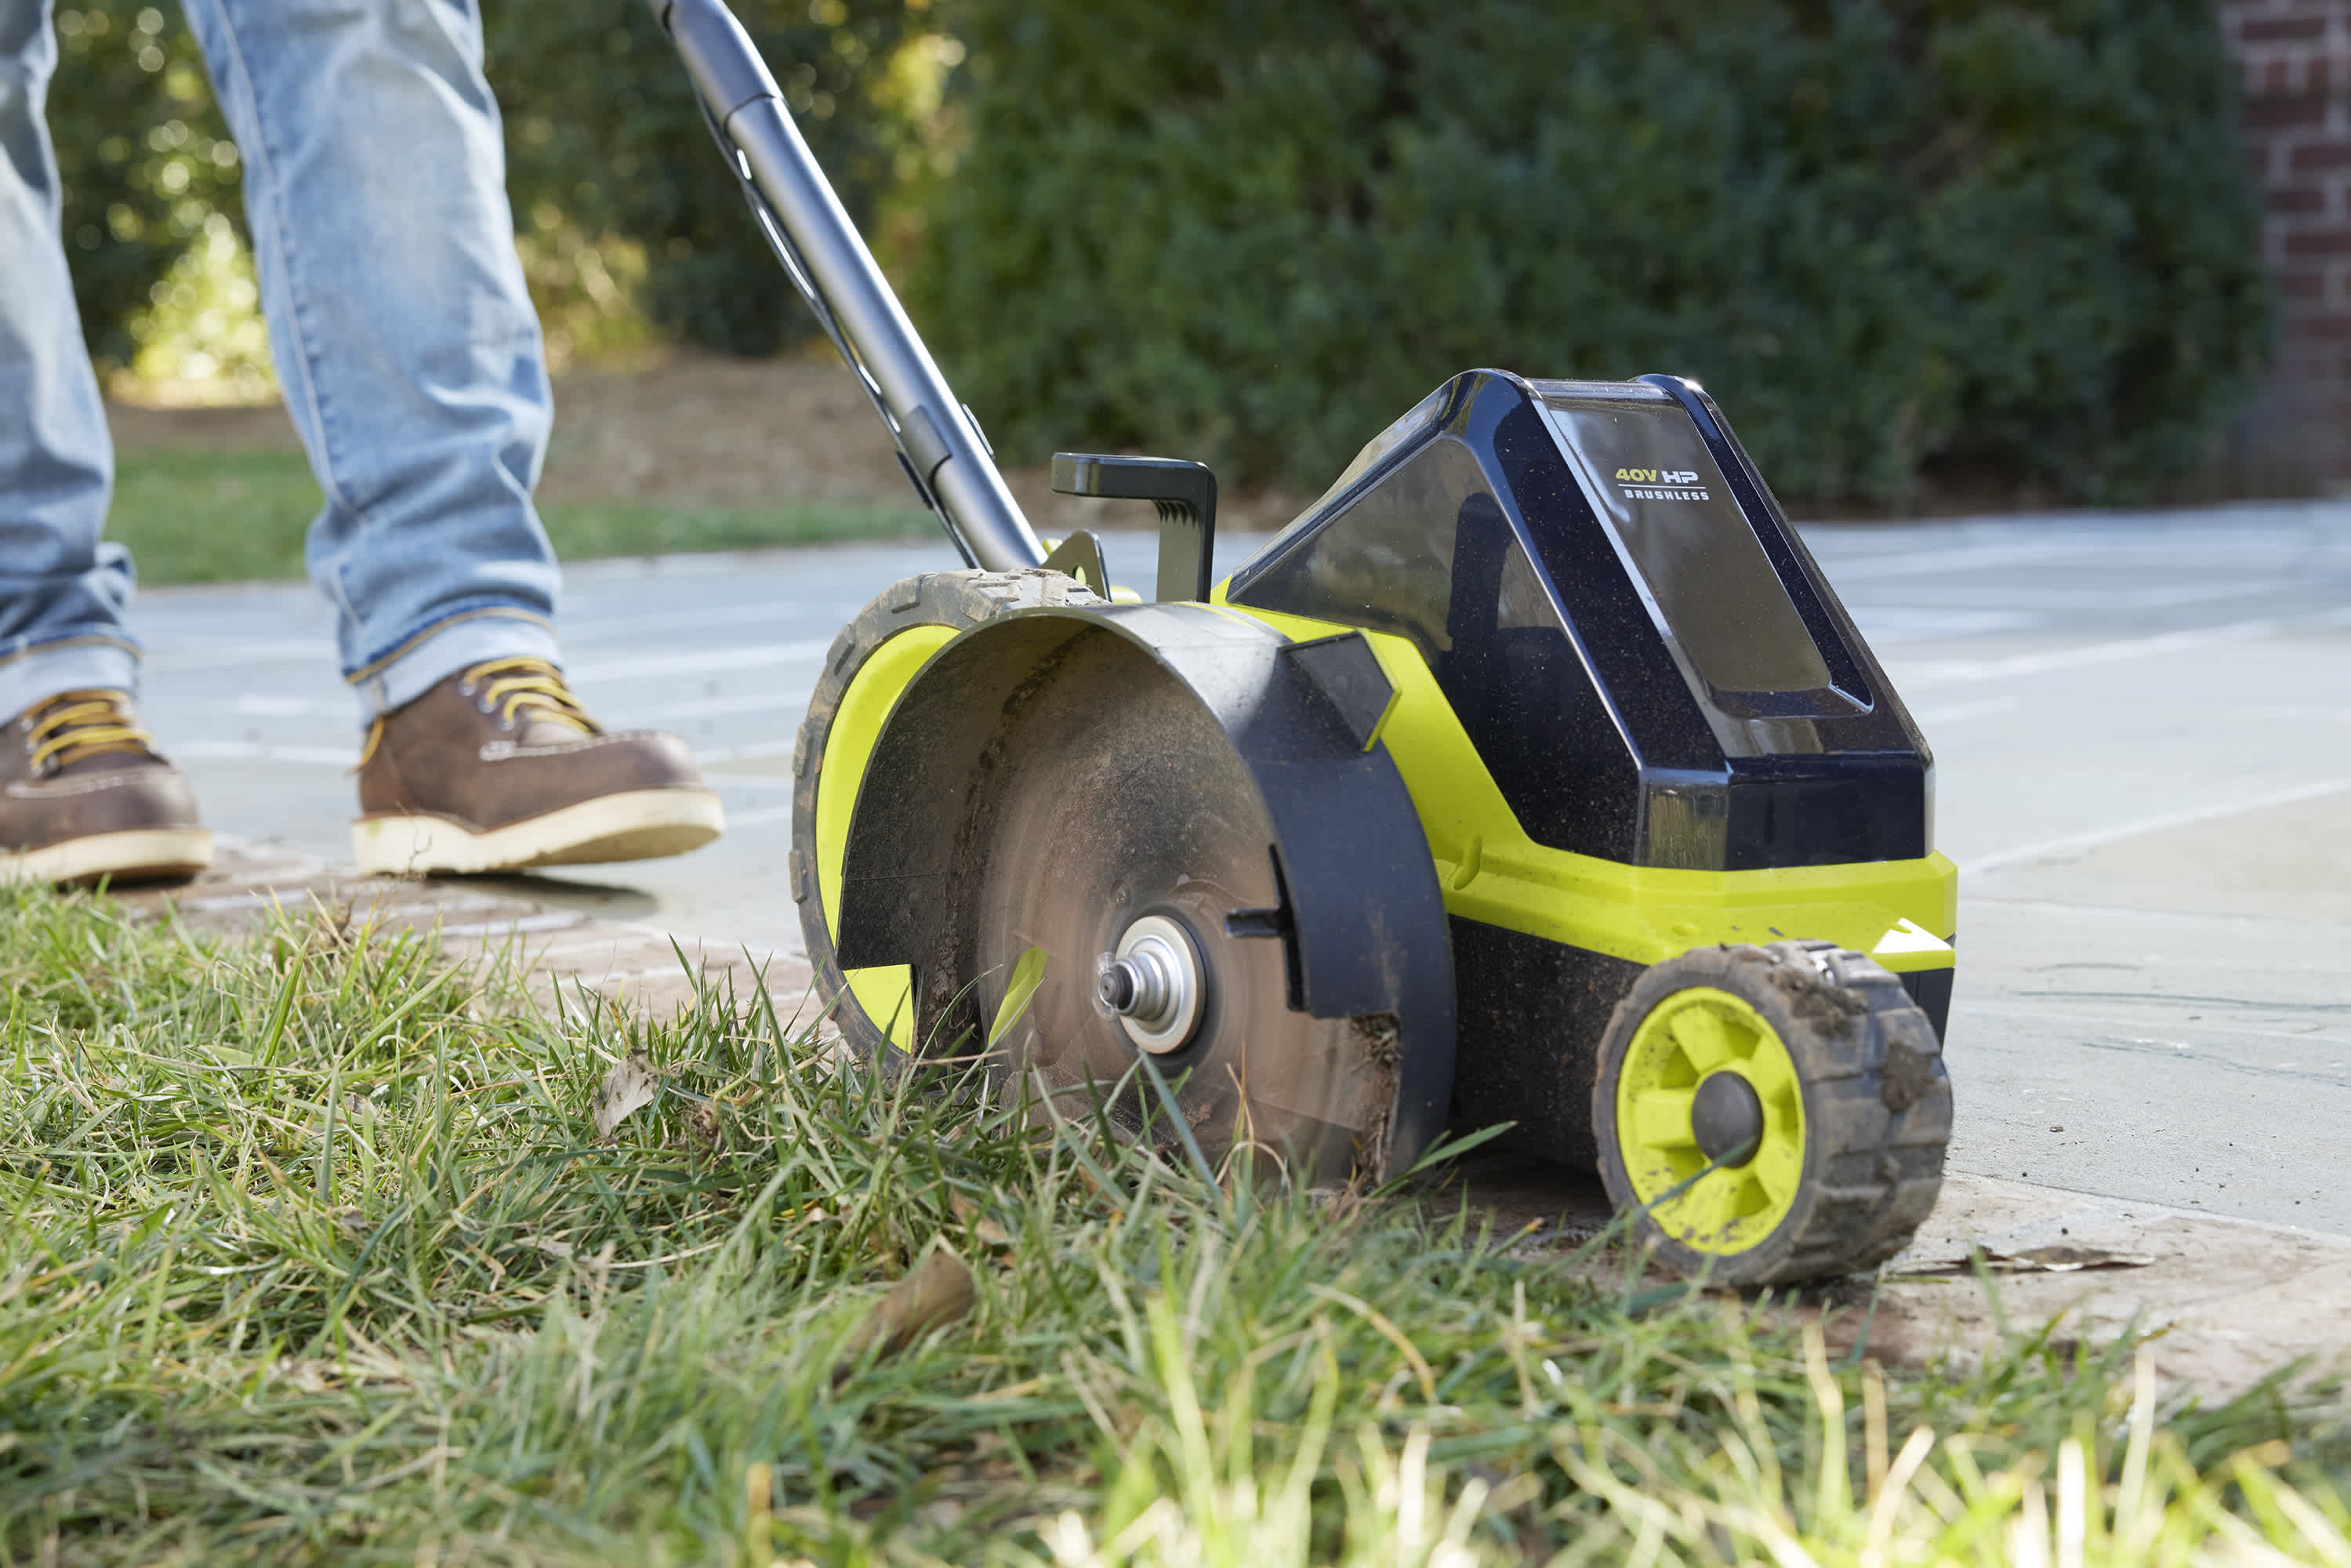 Product Features Image for 40V HP BRUSHLESS 9" EDGER KIT.